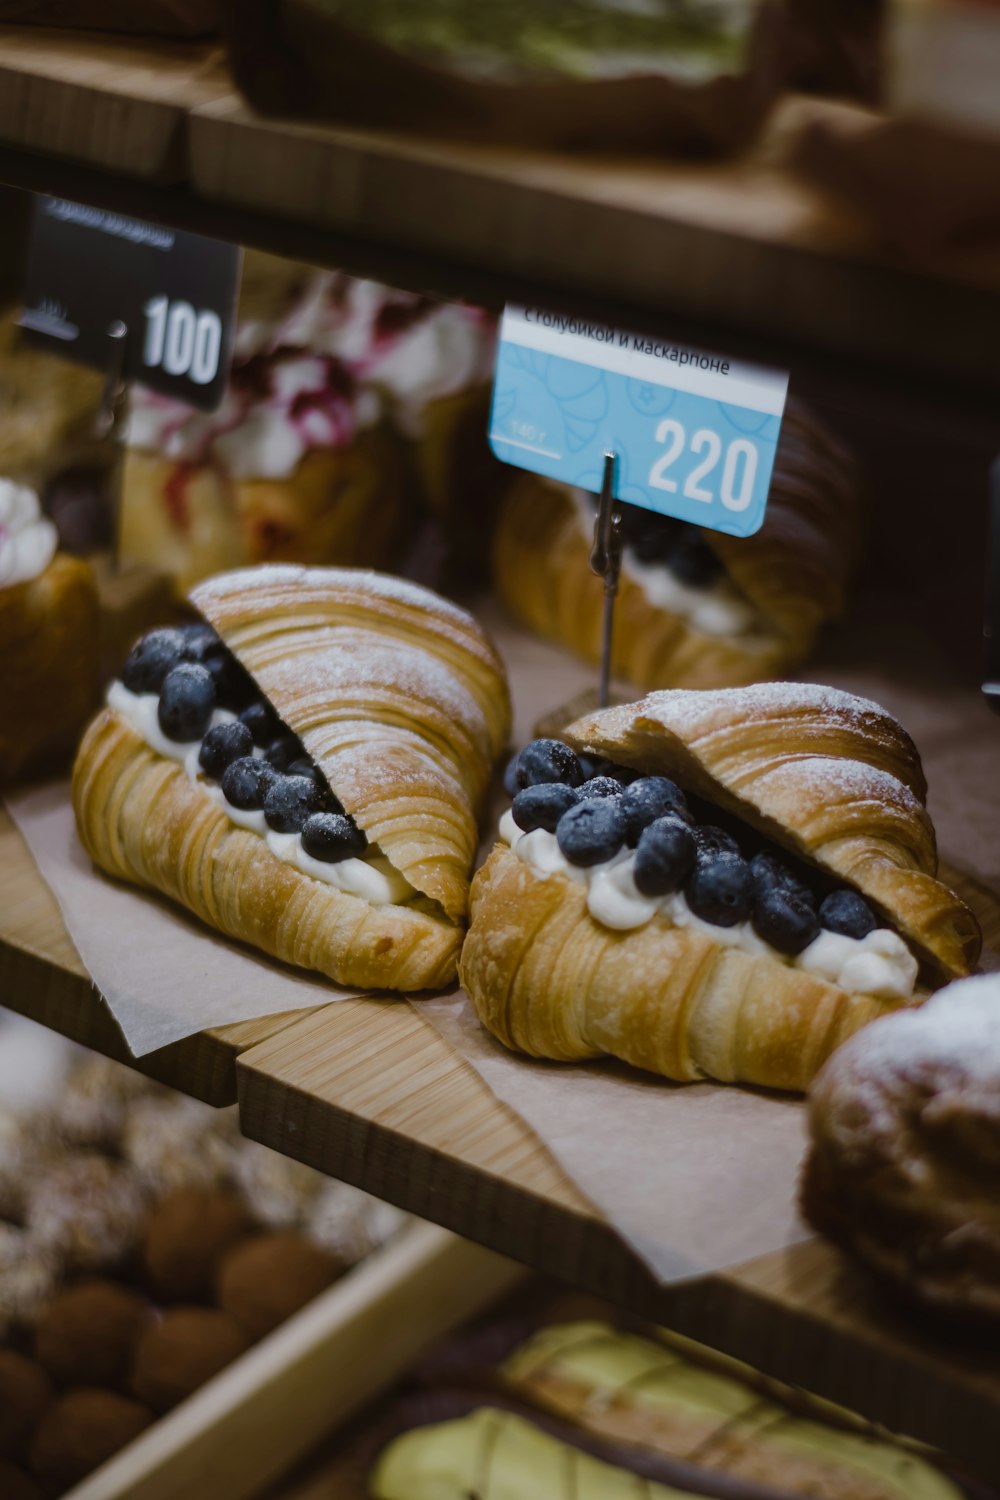 a display of pastries